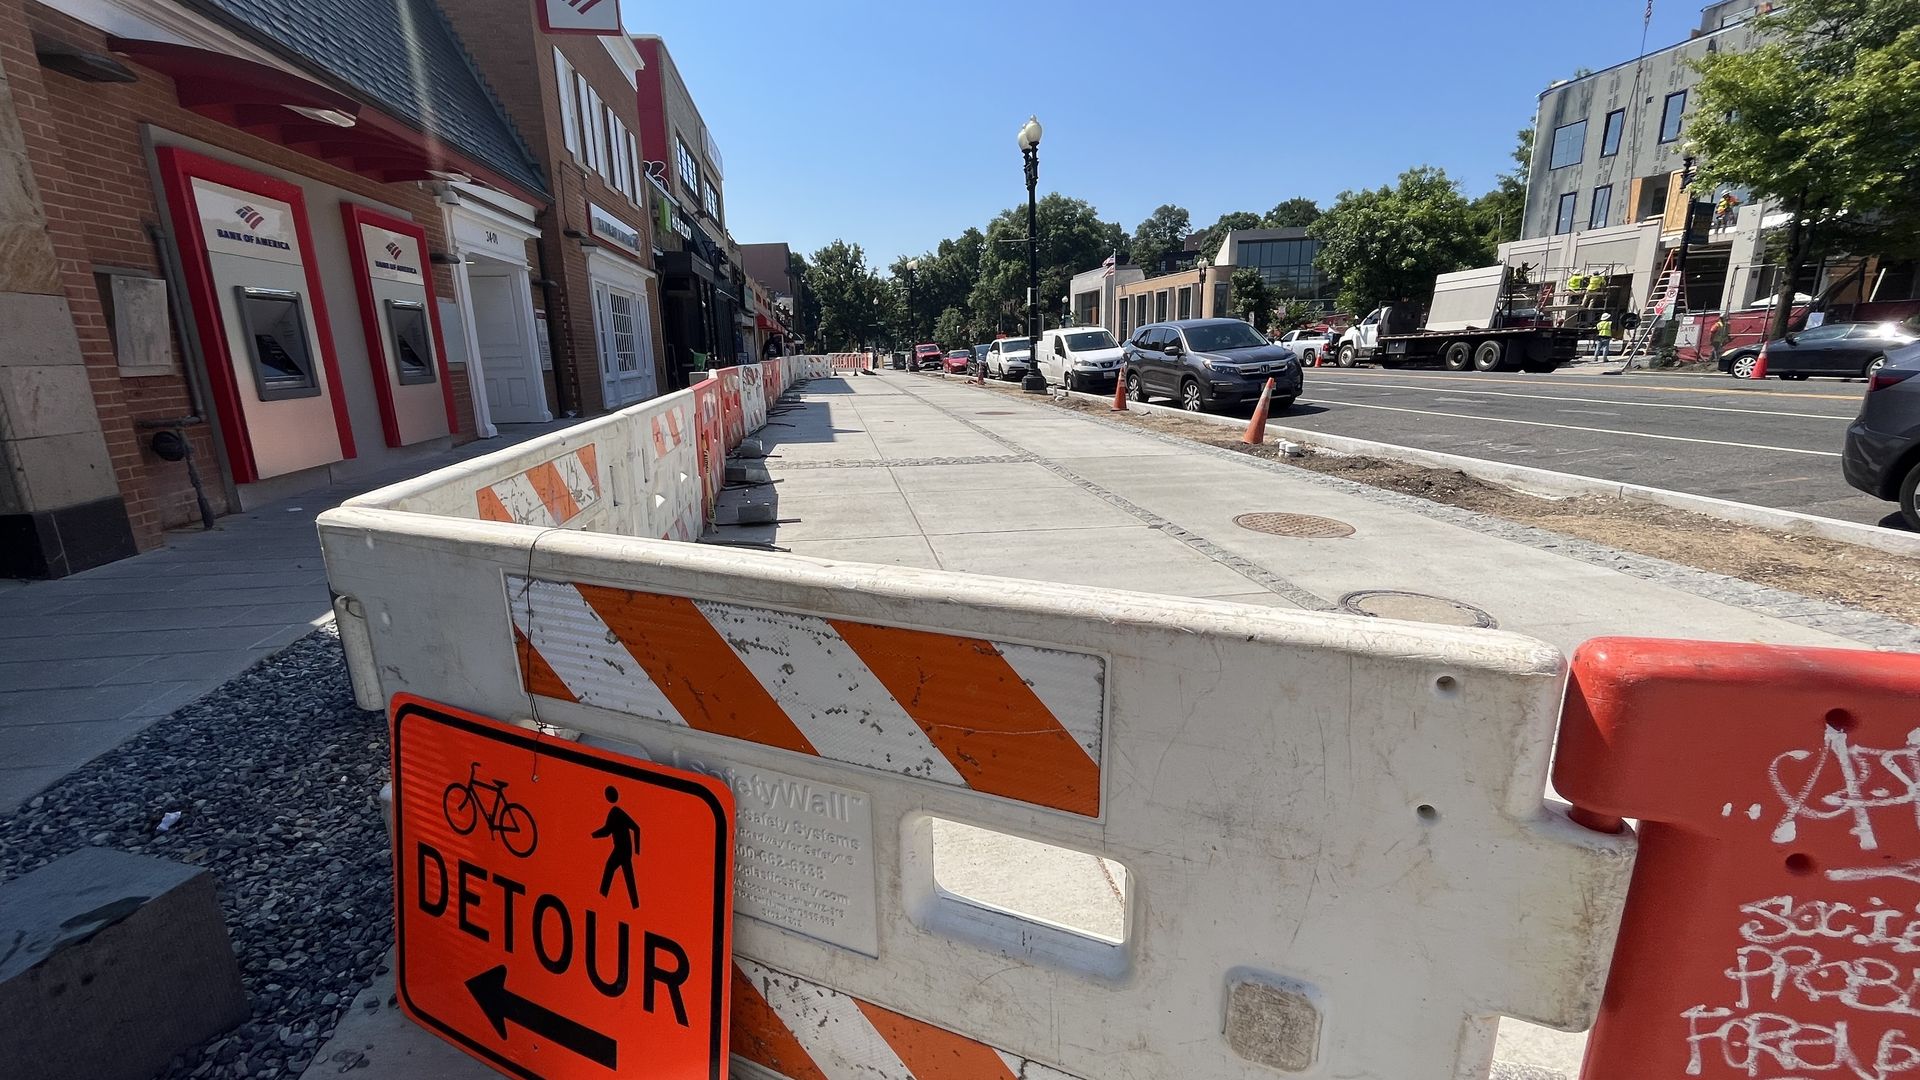 The renovated Cleveland Park service lane, with a "detour" sign and construction barricades 